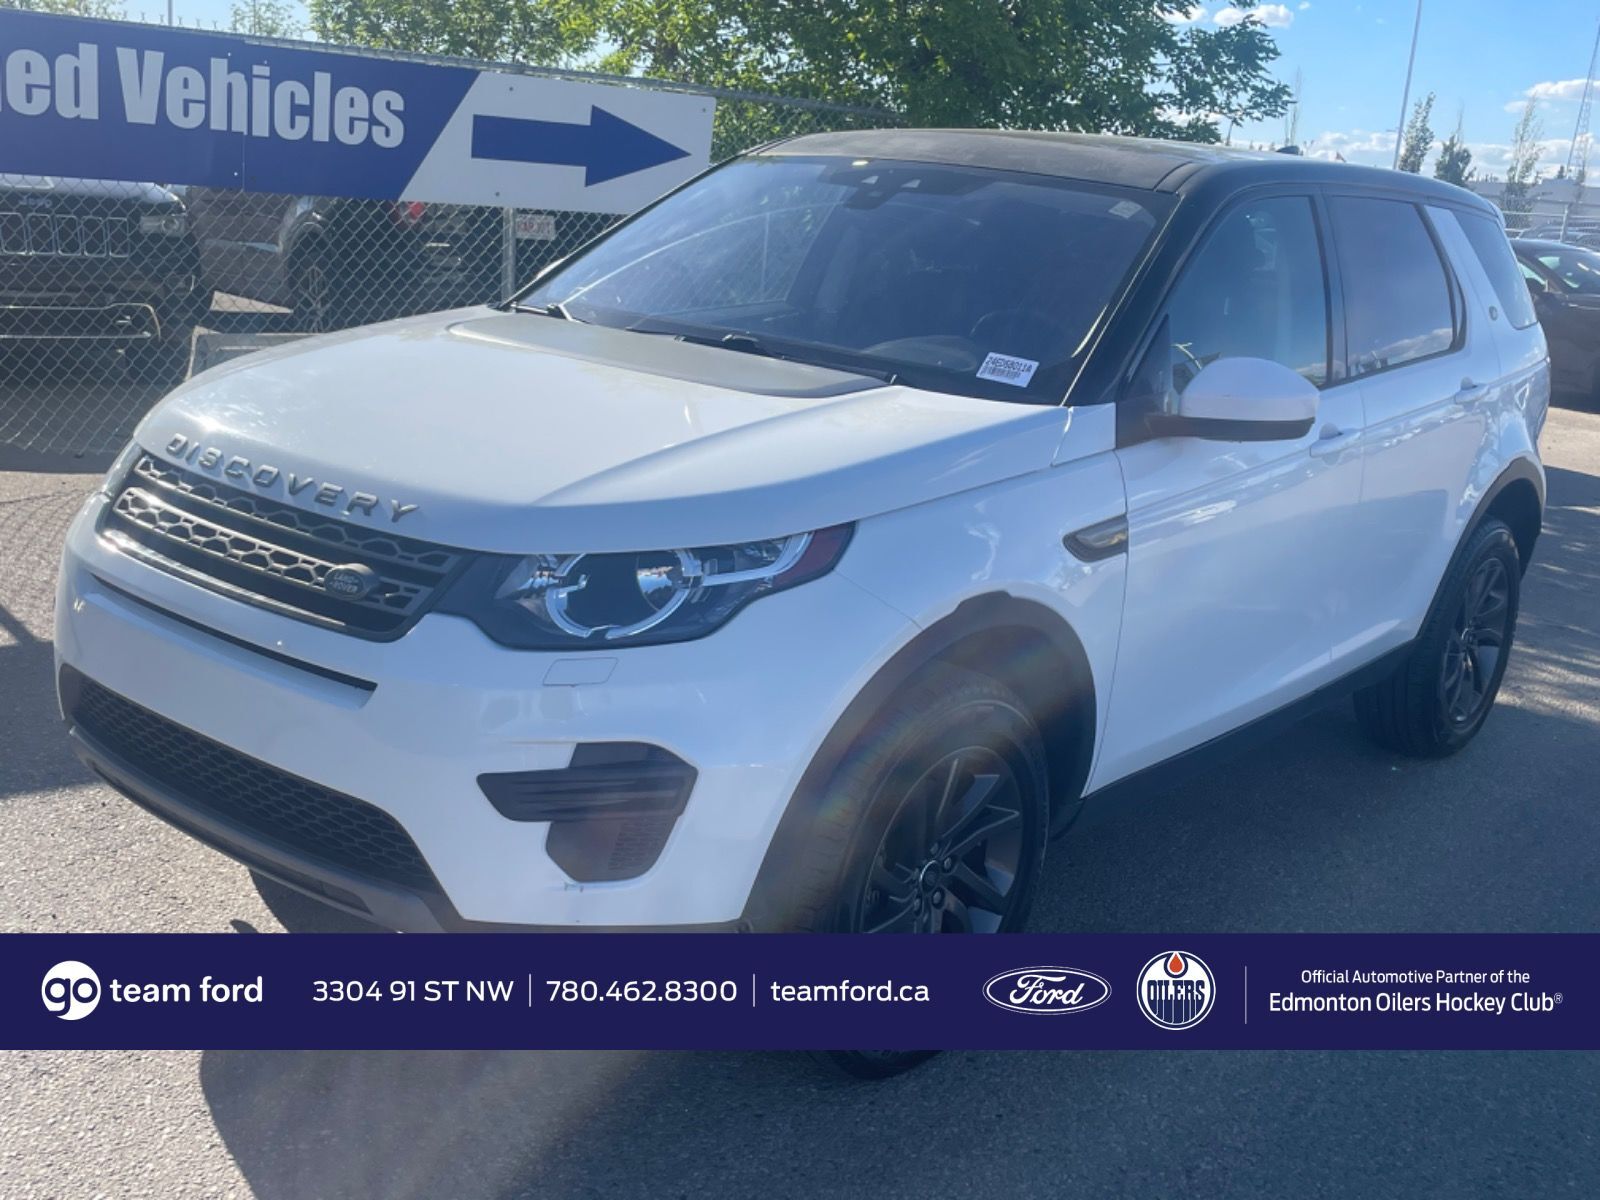 2018 Land Rover Discovery Sport SE - AWD, LEATHER, HEATED SEATS, BACK UP CAM, AND 